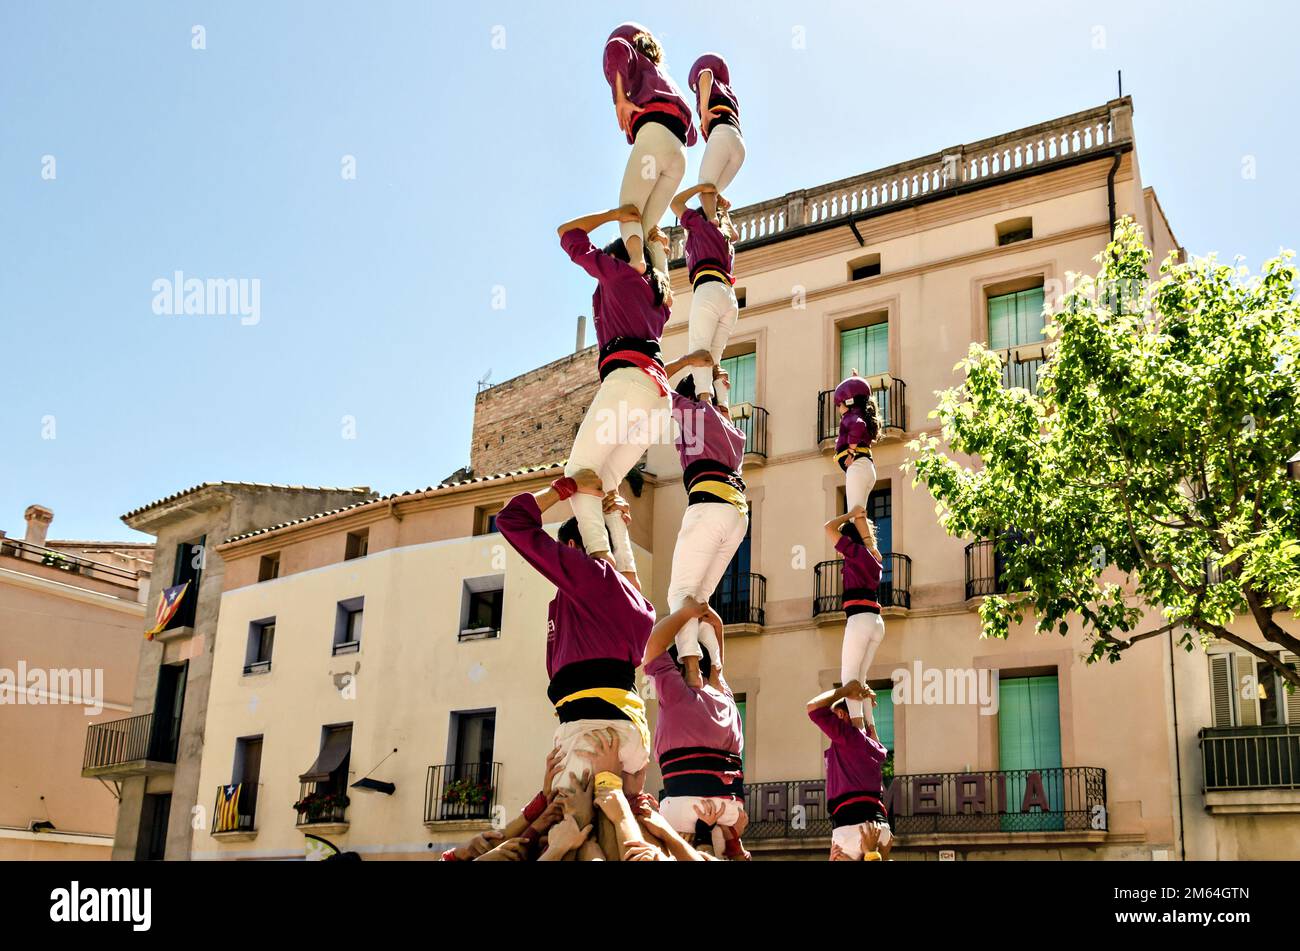 Igualada, Barcelona; April 28, 2019: Castelleras Days of Barcelona. 24th anniversary of the Moixiganguers group from Igualada, building a human tower Stock Photo